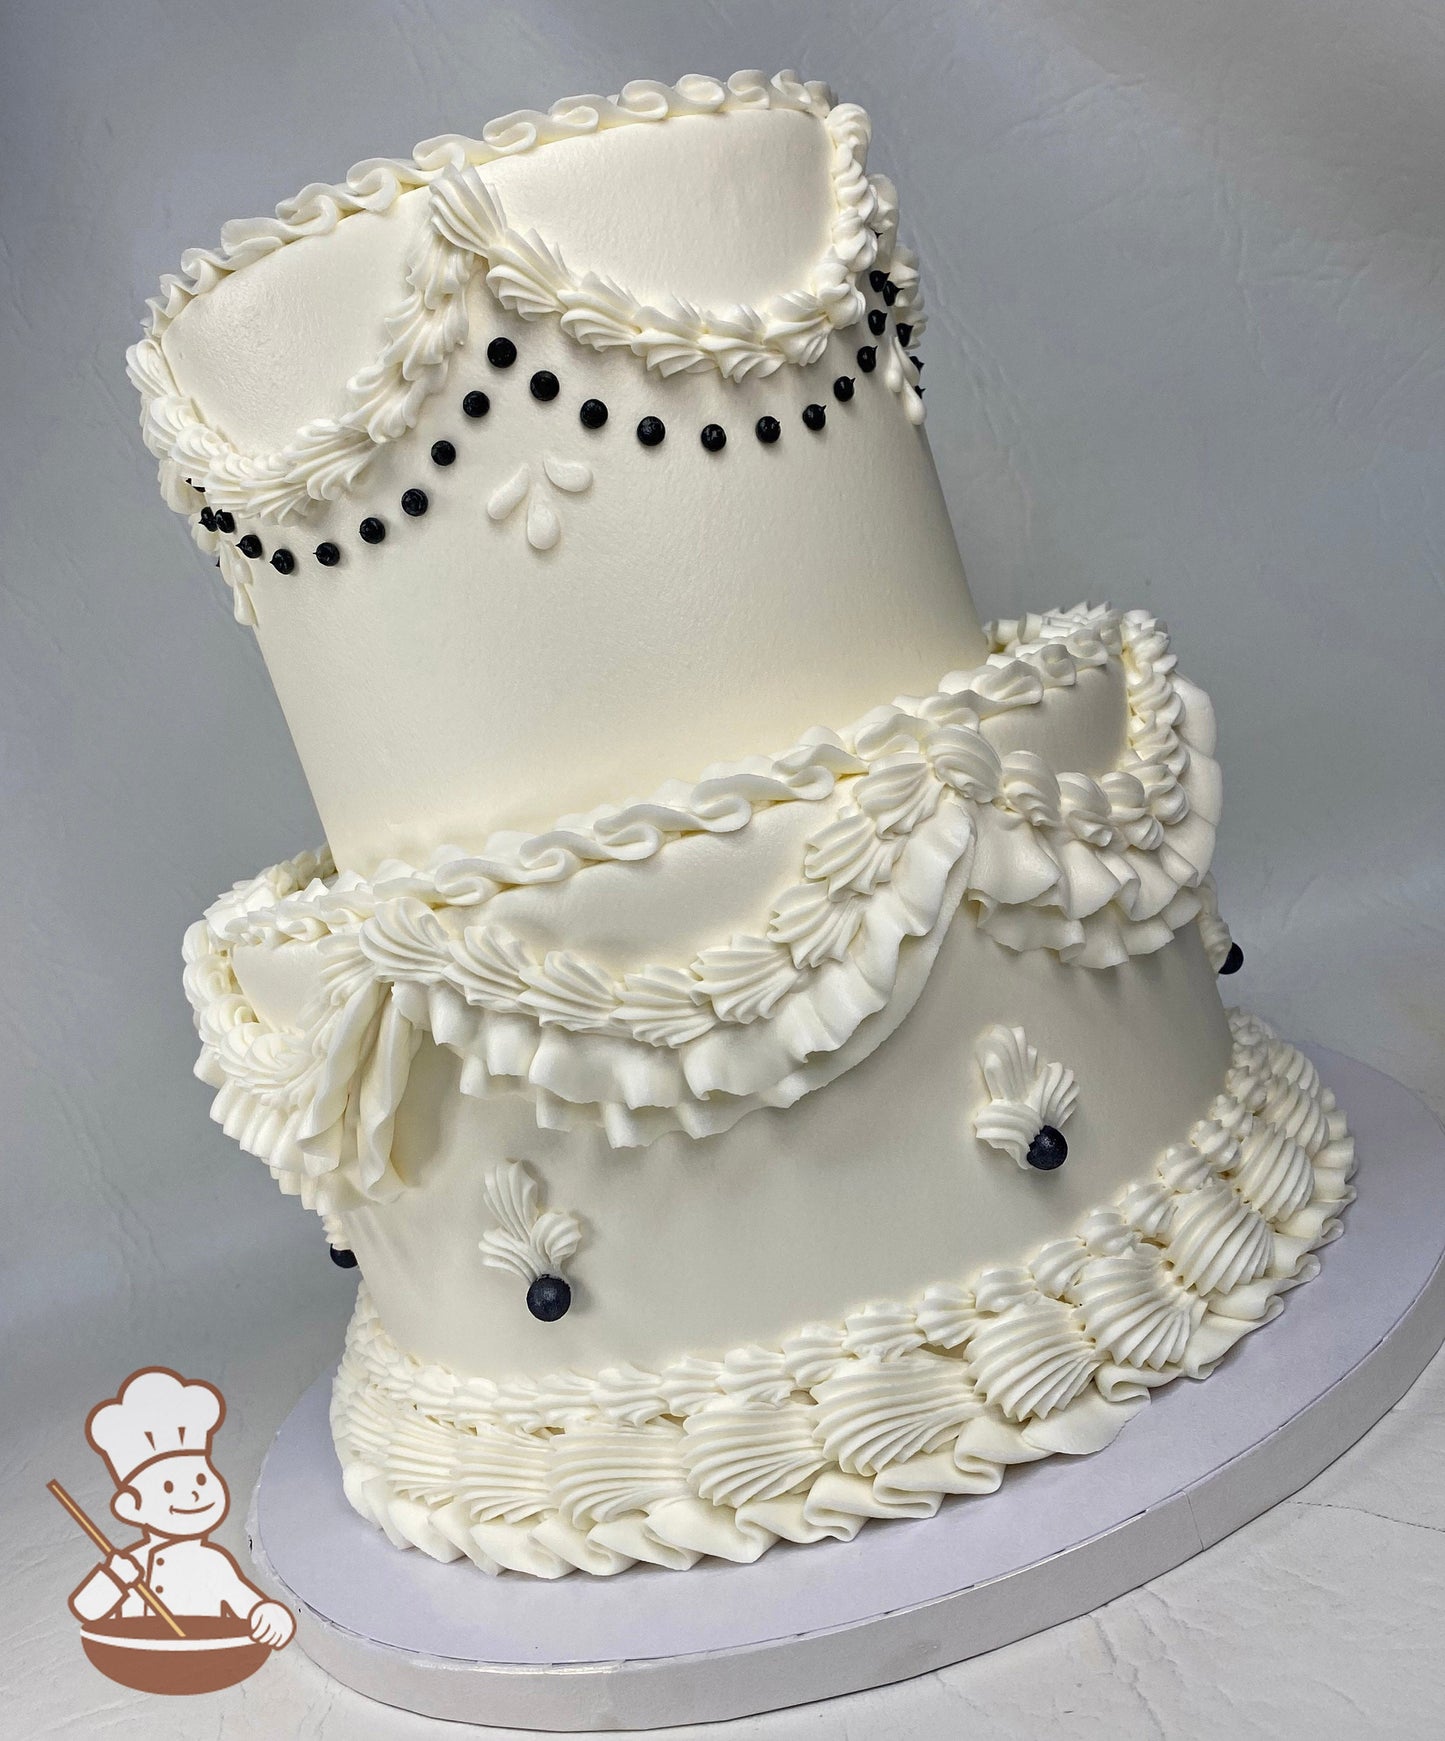 2-tier round cake with smooth white icing and intricate buttercream decorations including large shell-trims and black pearls on the cake walls.